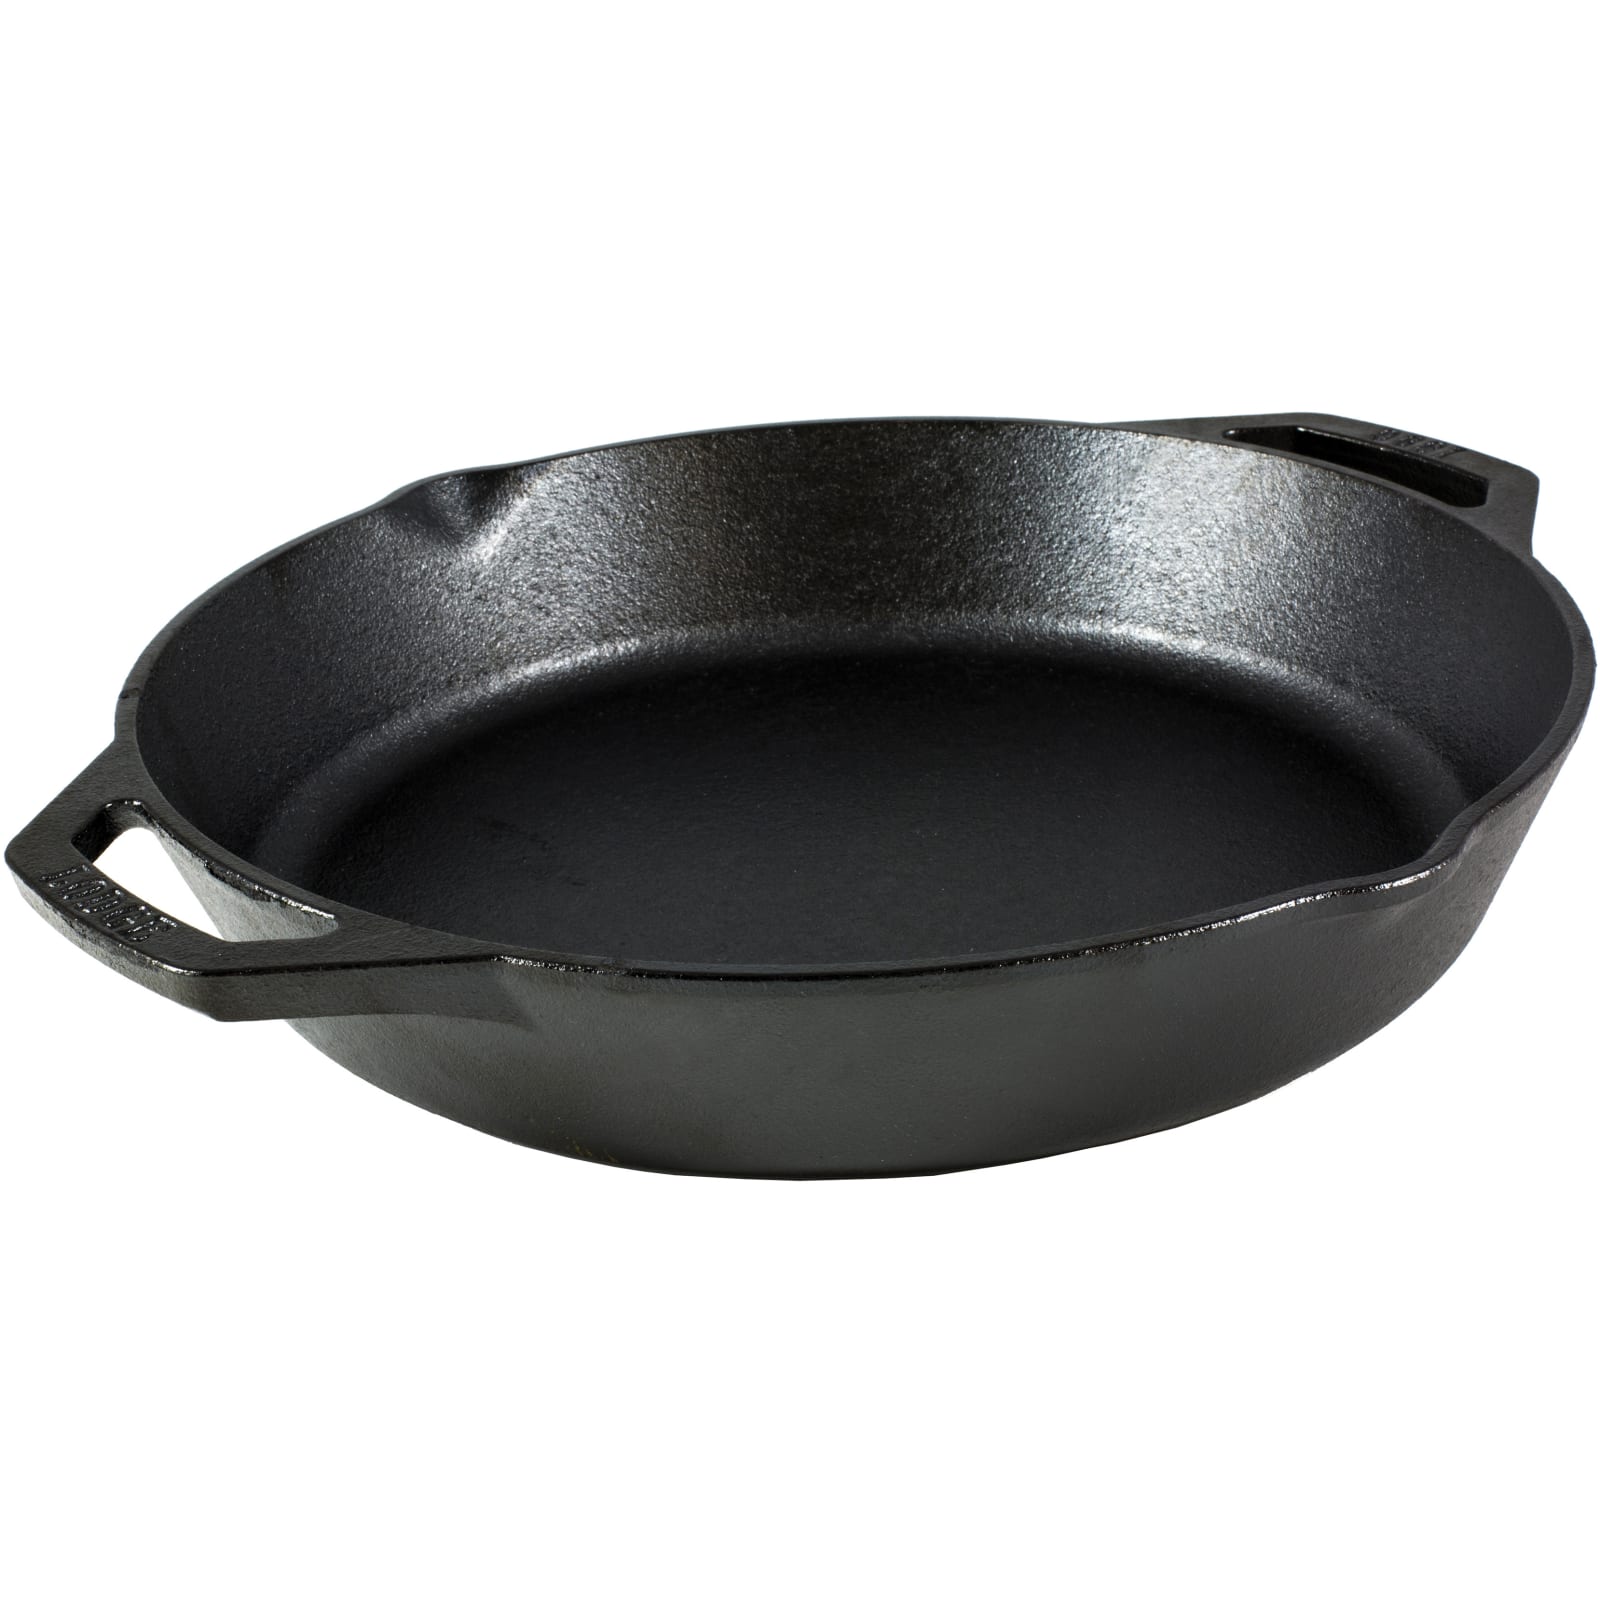 12 in Black Cast Iron Pan by Lodge at Fleet Farm